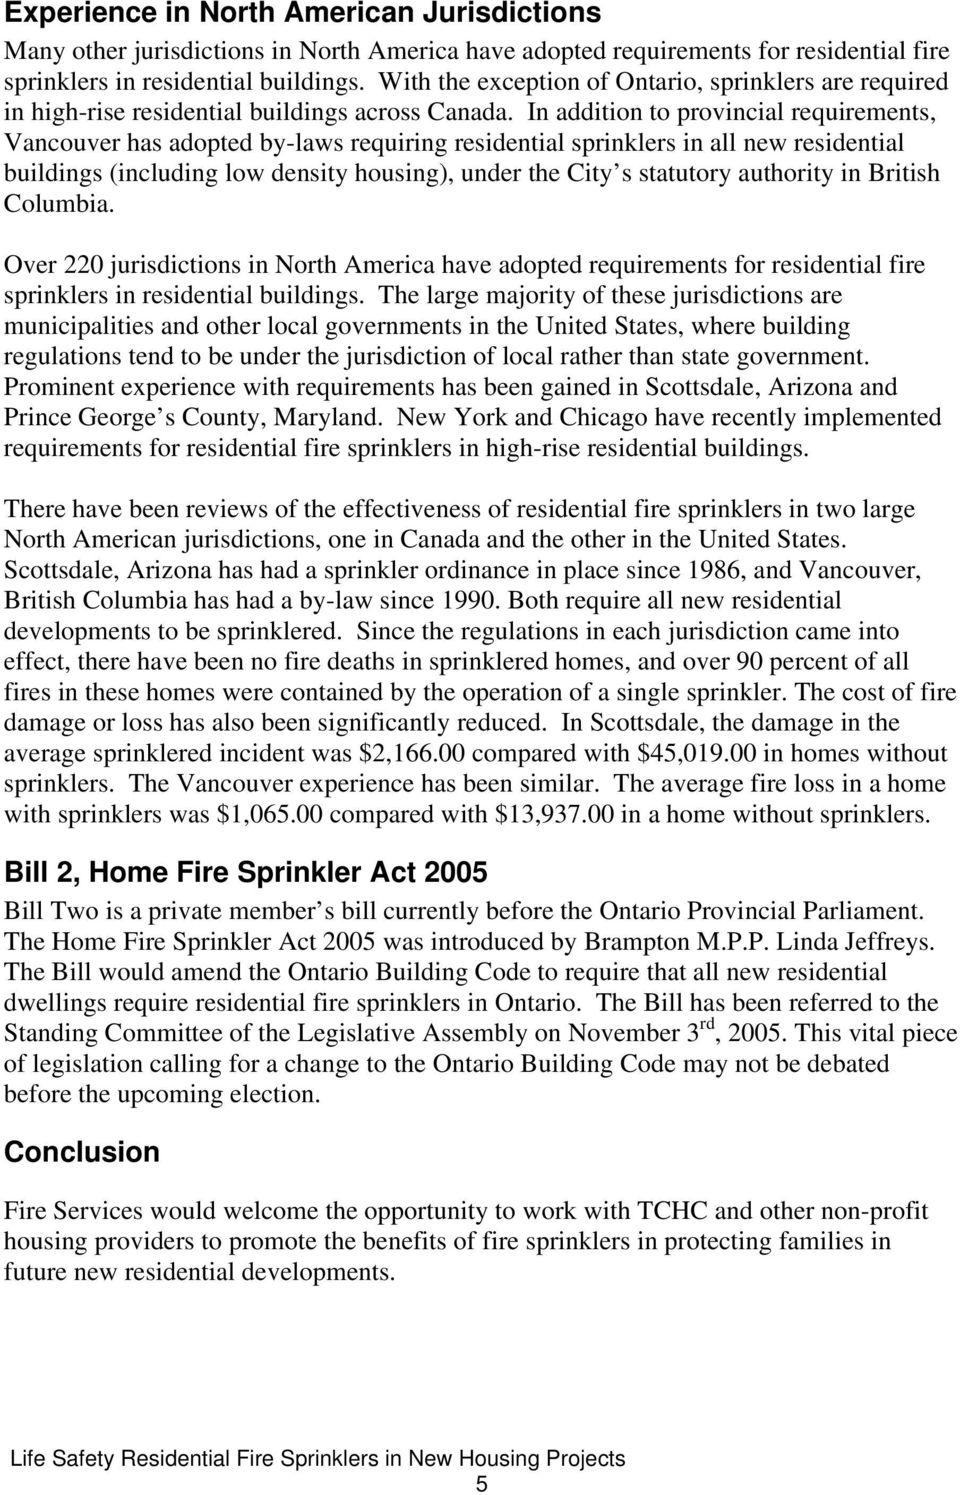 In addition to provincial requirements, Vancouver has adopted by-laws requiring residential sprinklers in all new residential buildings (including low density housing), under the City s statutory